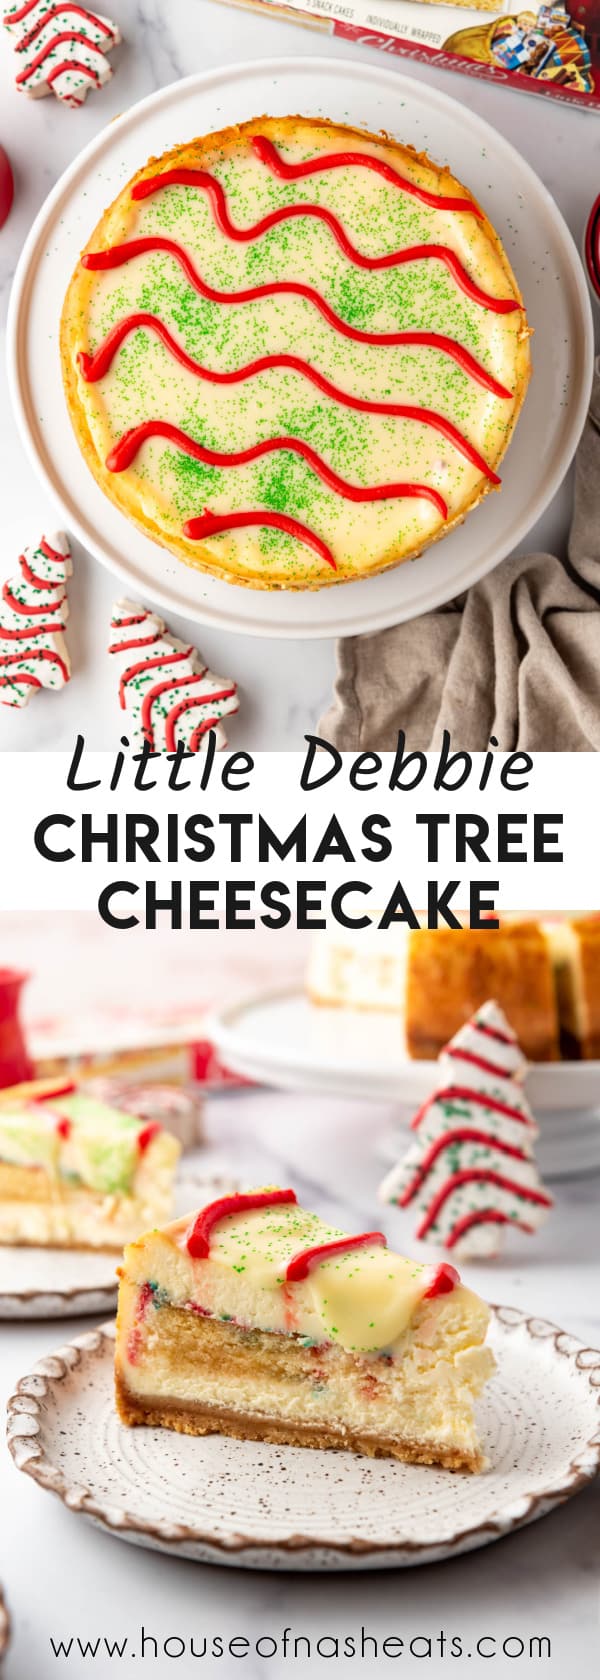 A collage of images of Little Debbie Christmas Tree Cheesecake with text overlay.